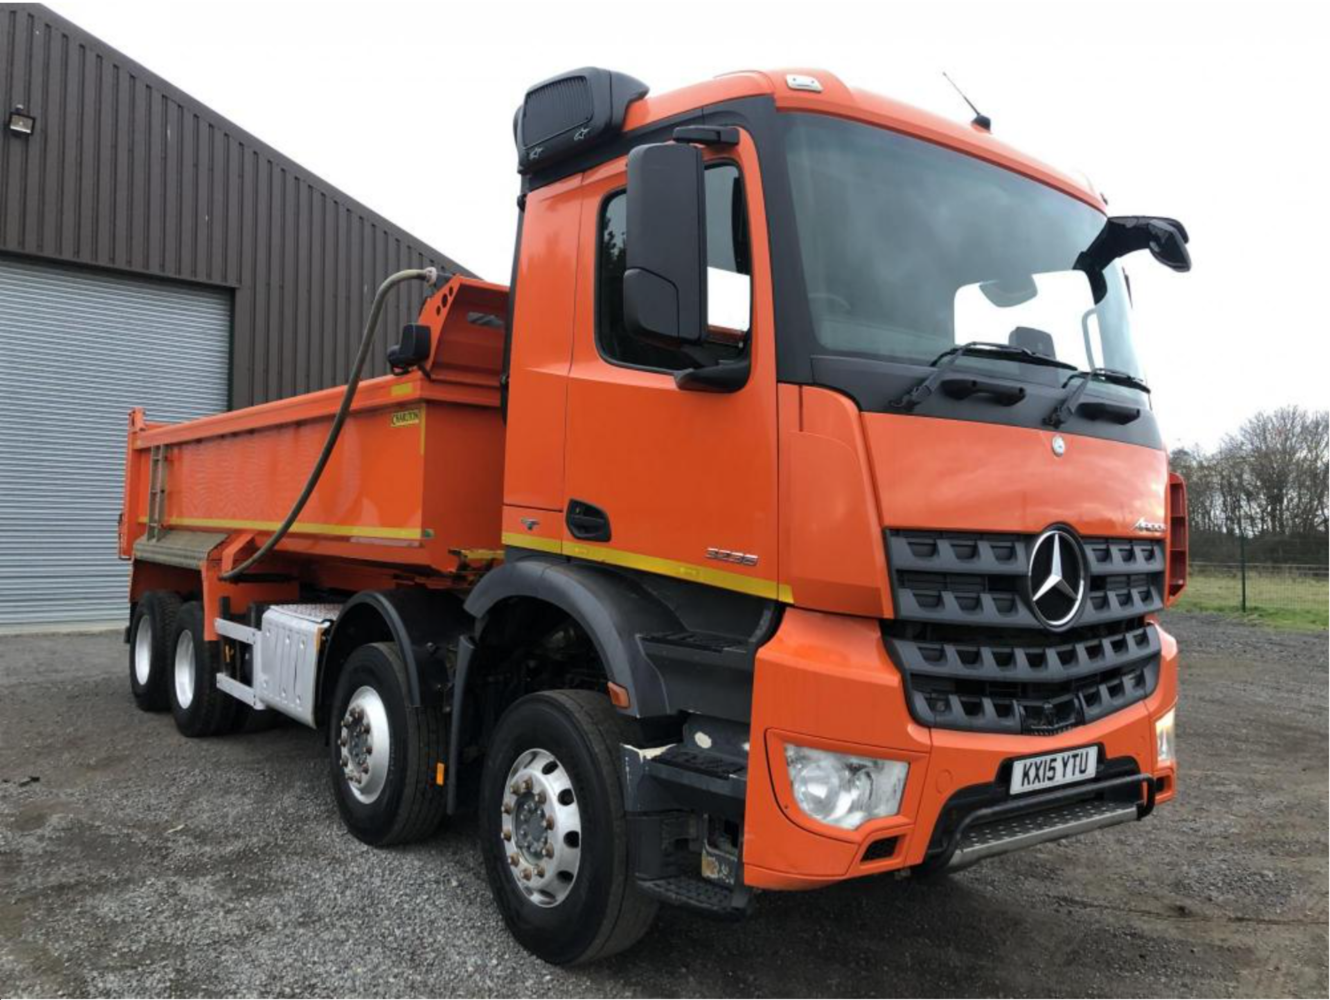 11AM FRIDAY SALE! MERCEDES 8X4 TIPPER, UNUSED 4WD TRACTOR, DRILLING RIG, FORKLIFTS, BALERS, ROLLERS, DIGGERS, VANS, PLANT & MACHINERY + MORE